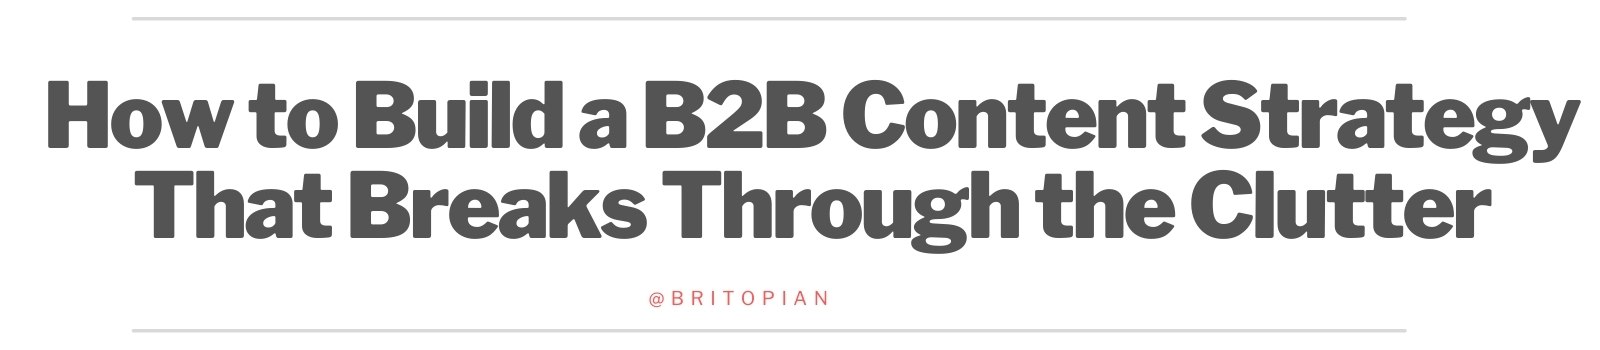 B2B Content Strategy